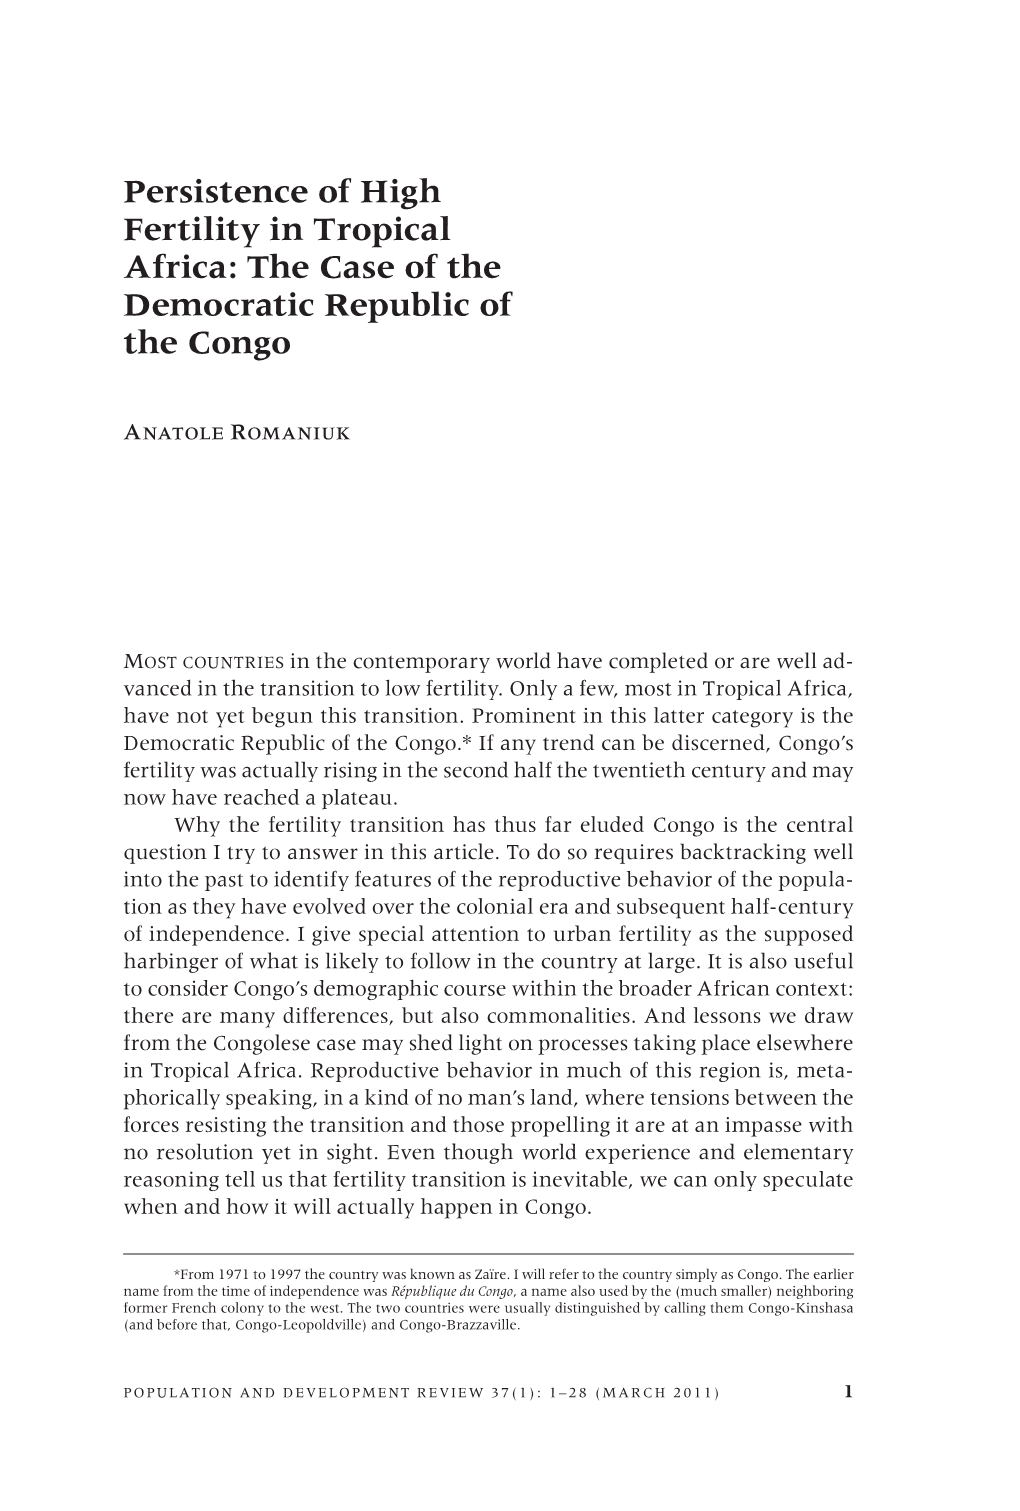 Persistence of High Fertility in Tropical Africa: the Case of the Democratic Republic of the Congo